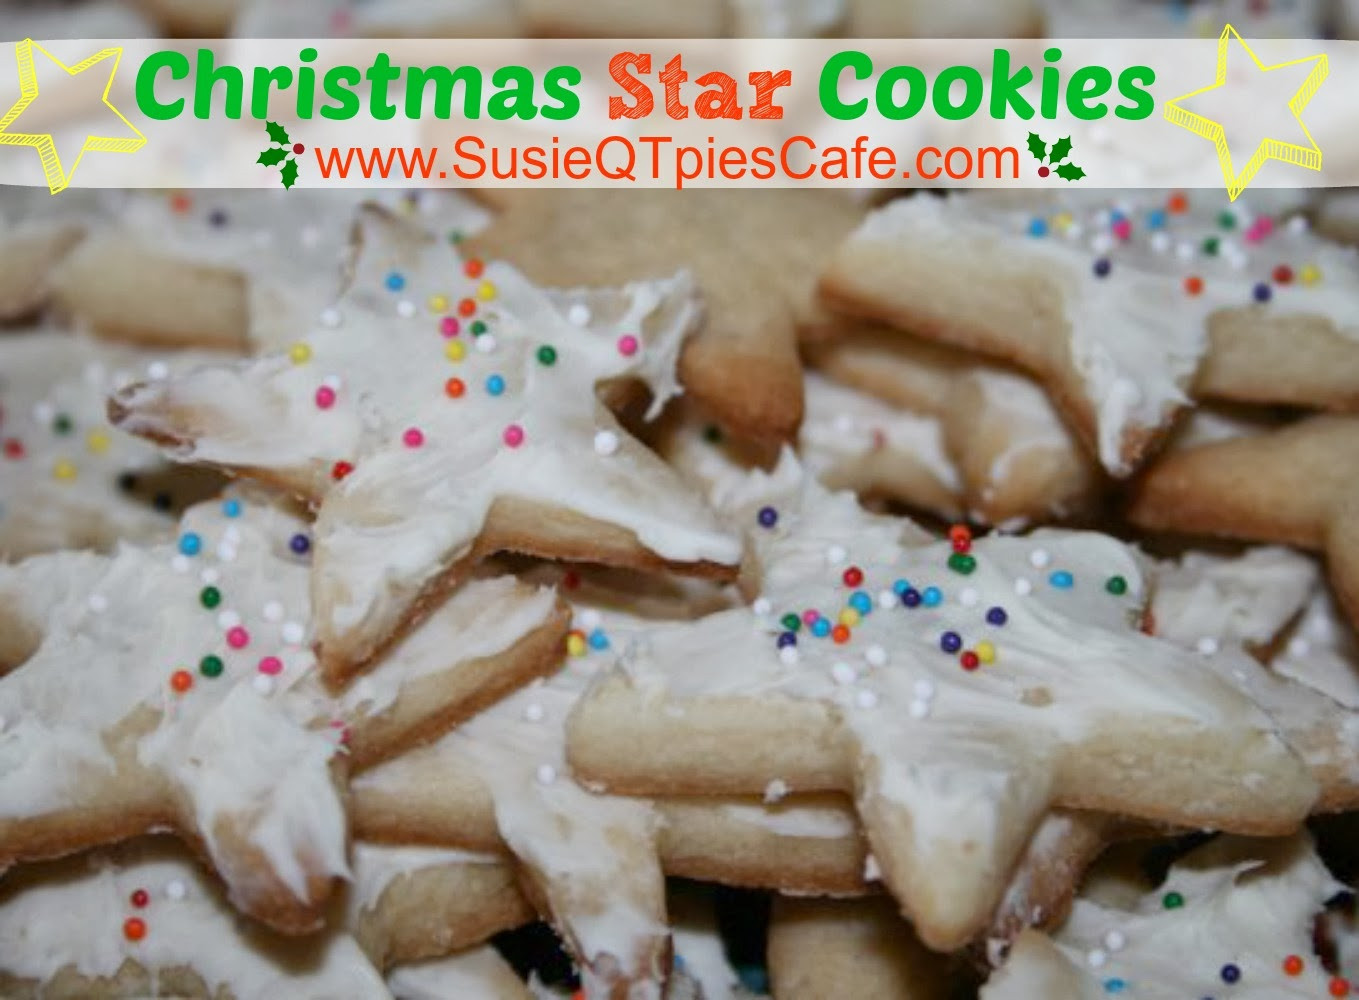 Christmas Star Cookies
 SusieQTpies Cafe Christmas Star Cookies Healthier